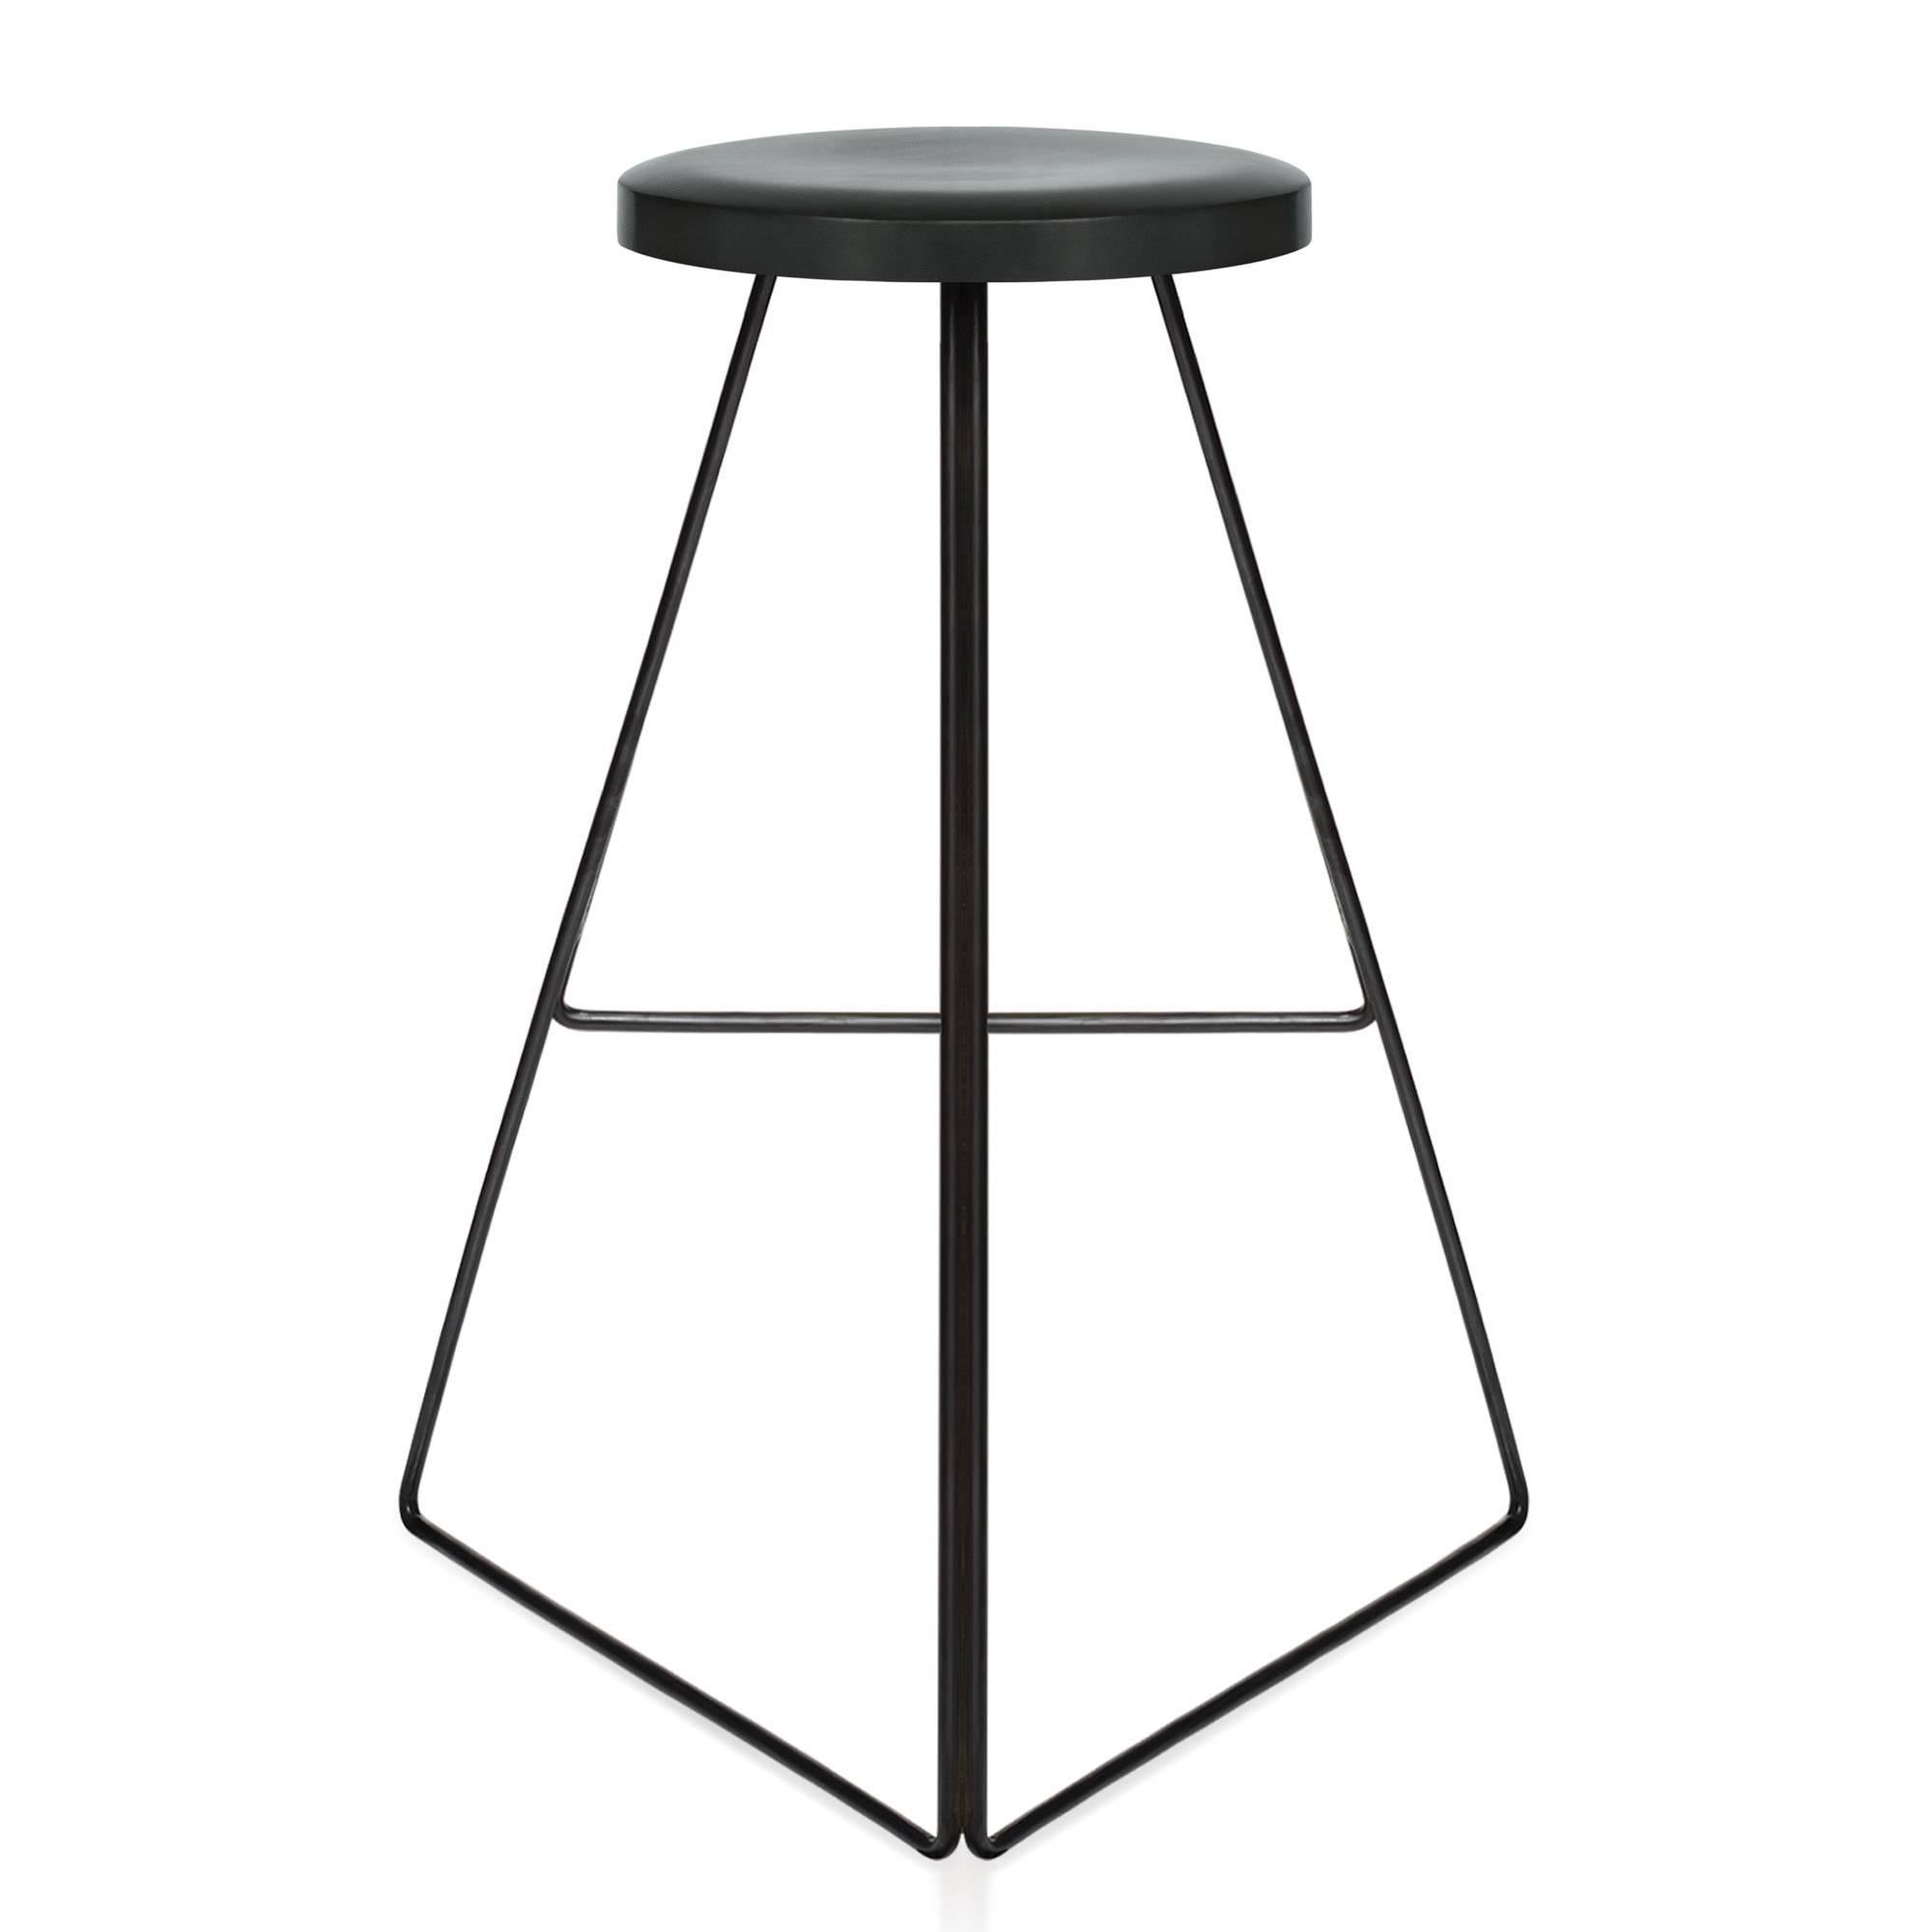 Mid-Century Modern The Coleman Stool - Black and Charcoal, 24